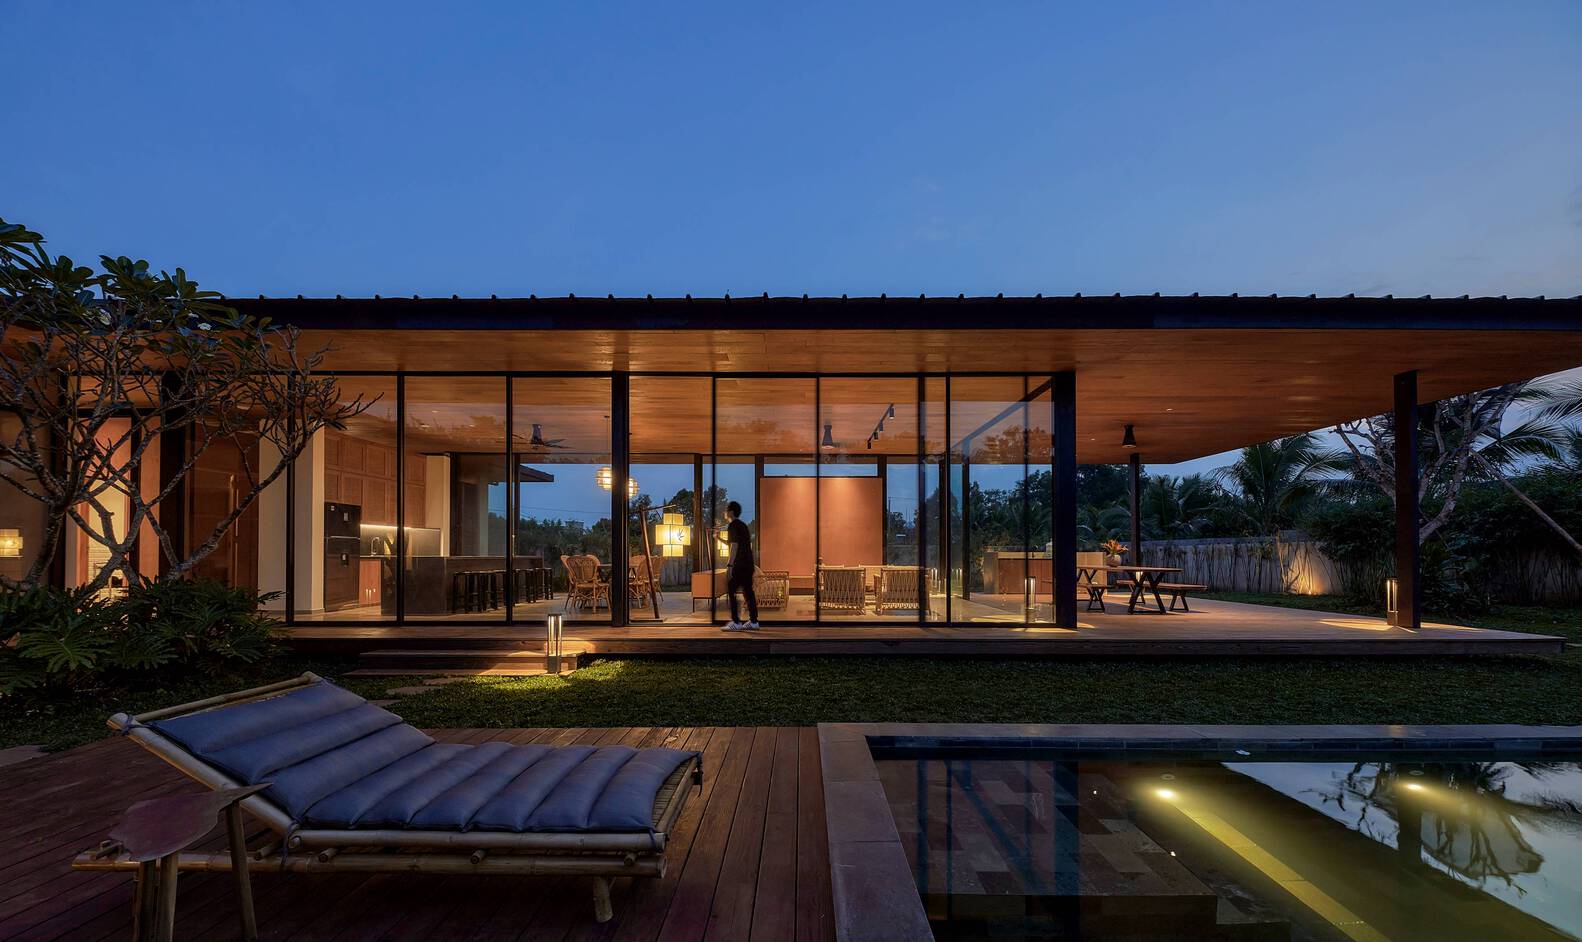 The Sustainable Weekend Villa in Vietnam. Photo by Phu Dao.